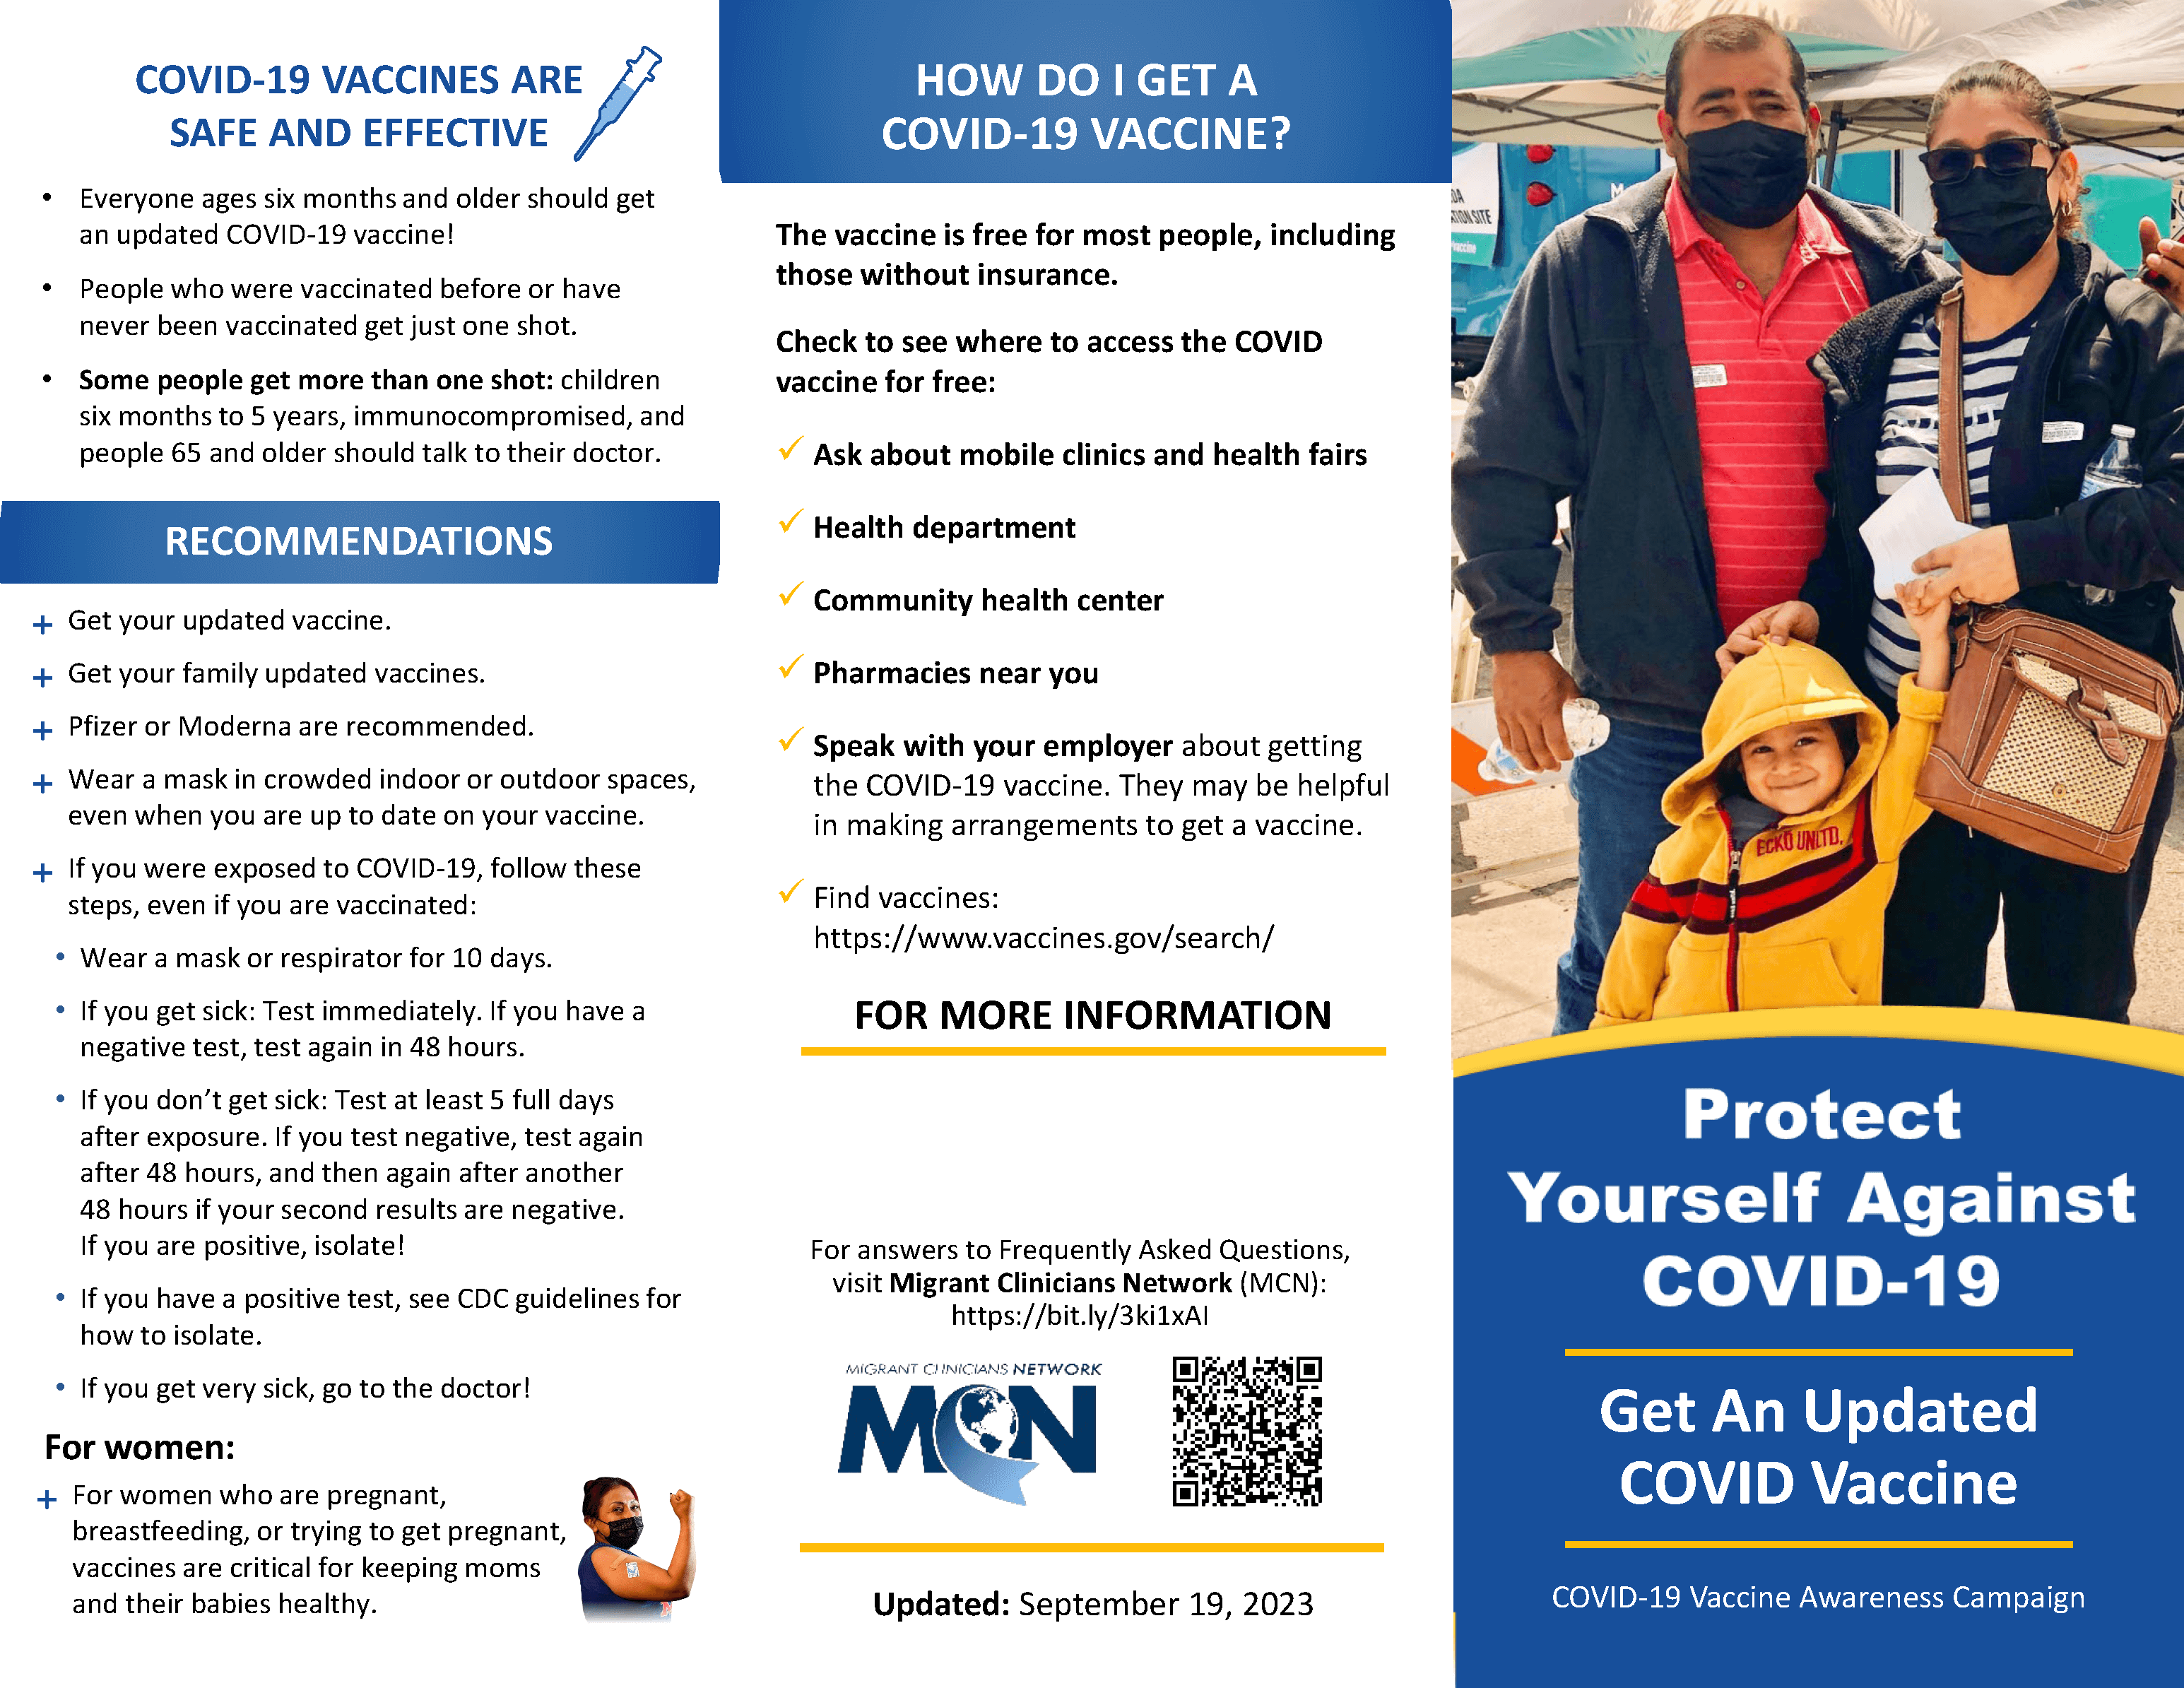 Protect Yourself Against COVID-19